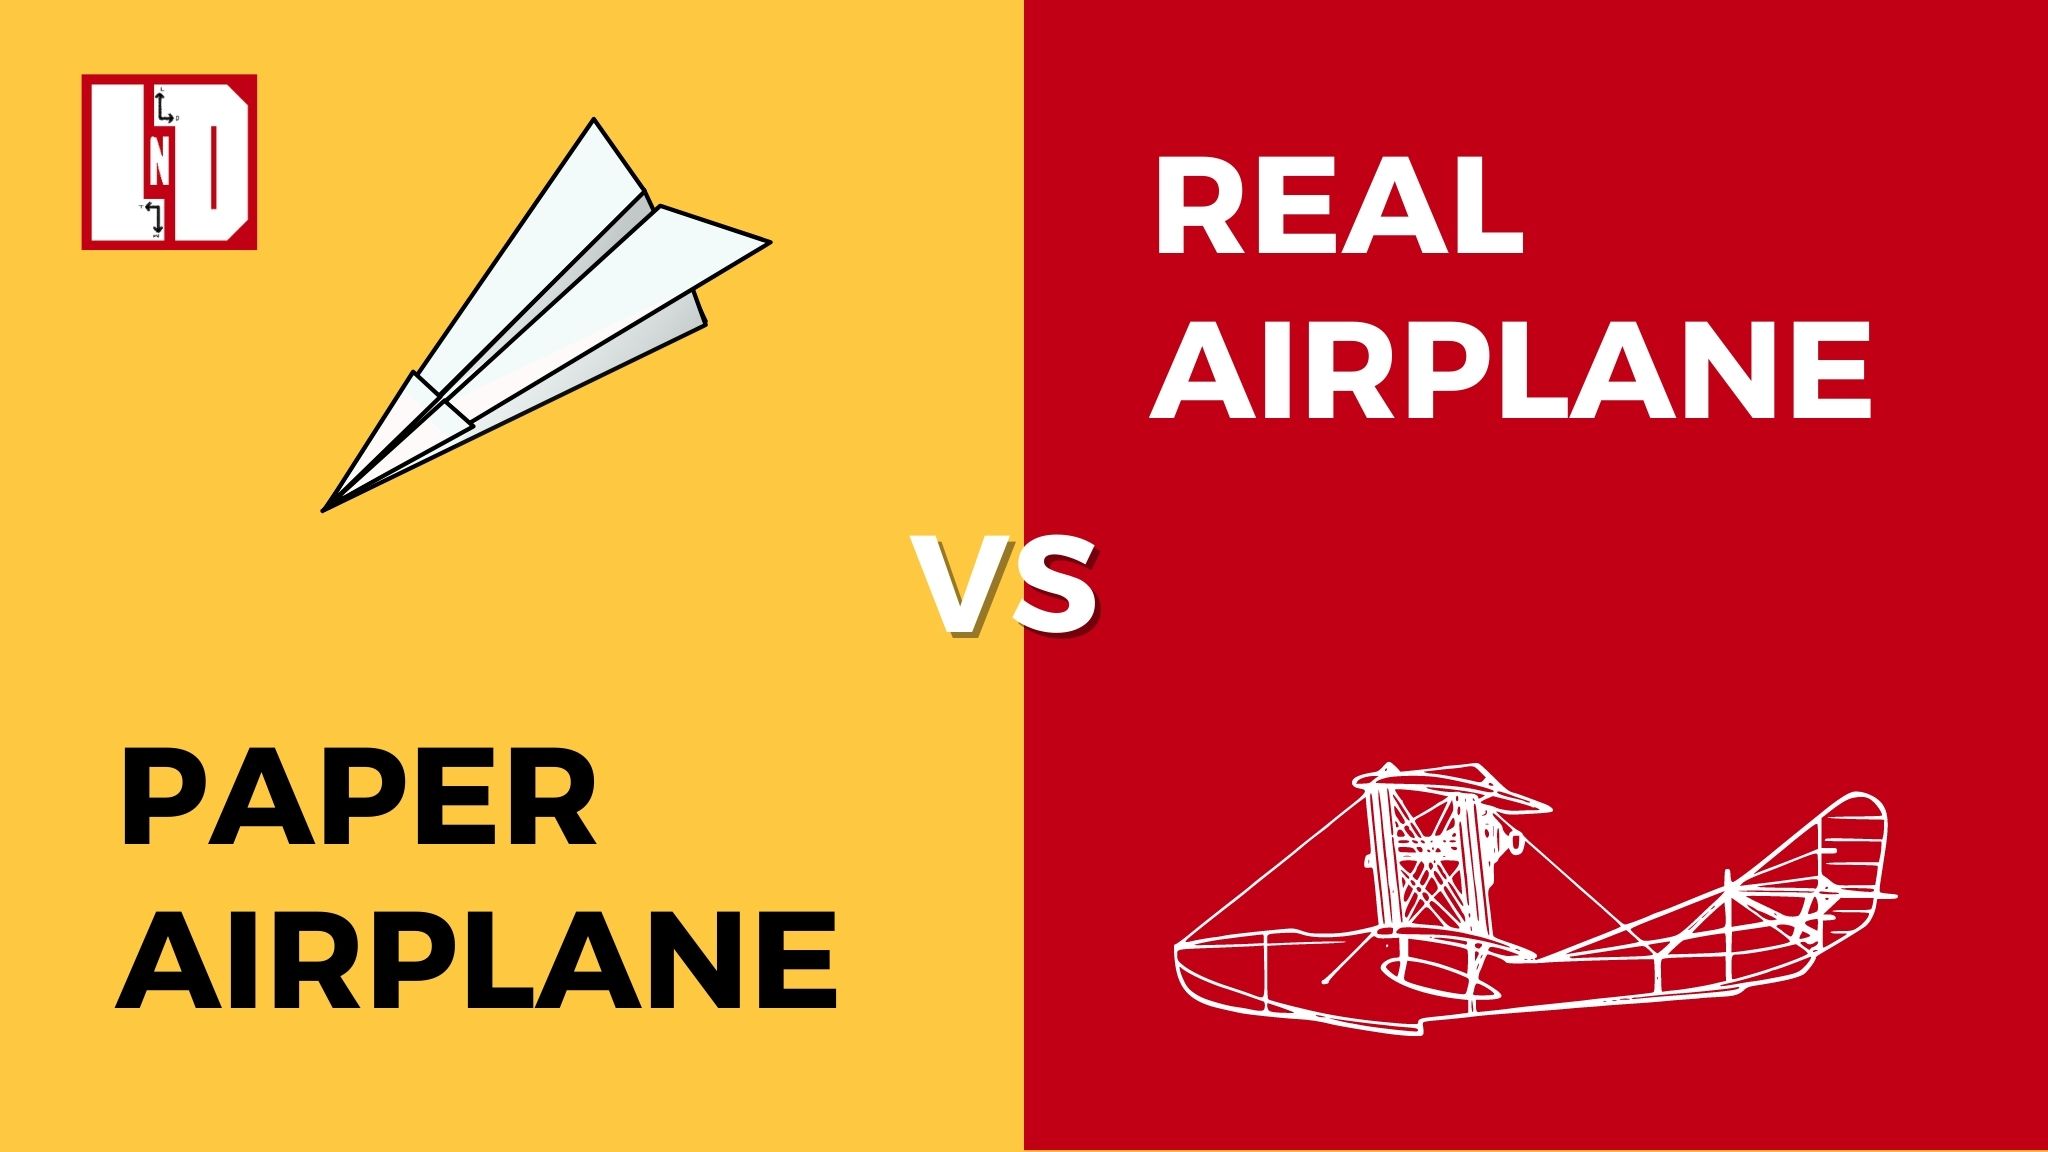 Paper airplane vs Real Airplane - which one is first?